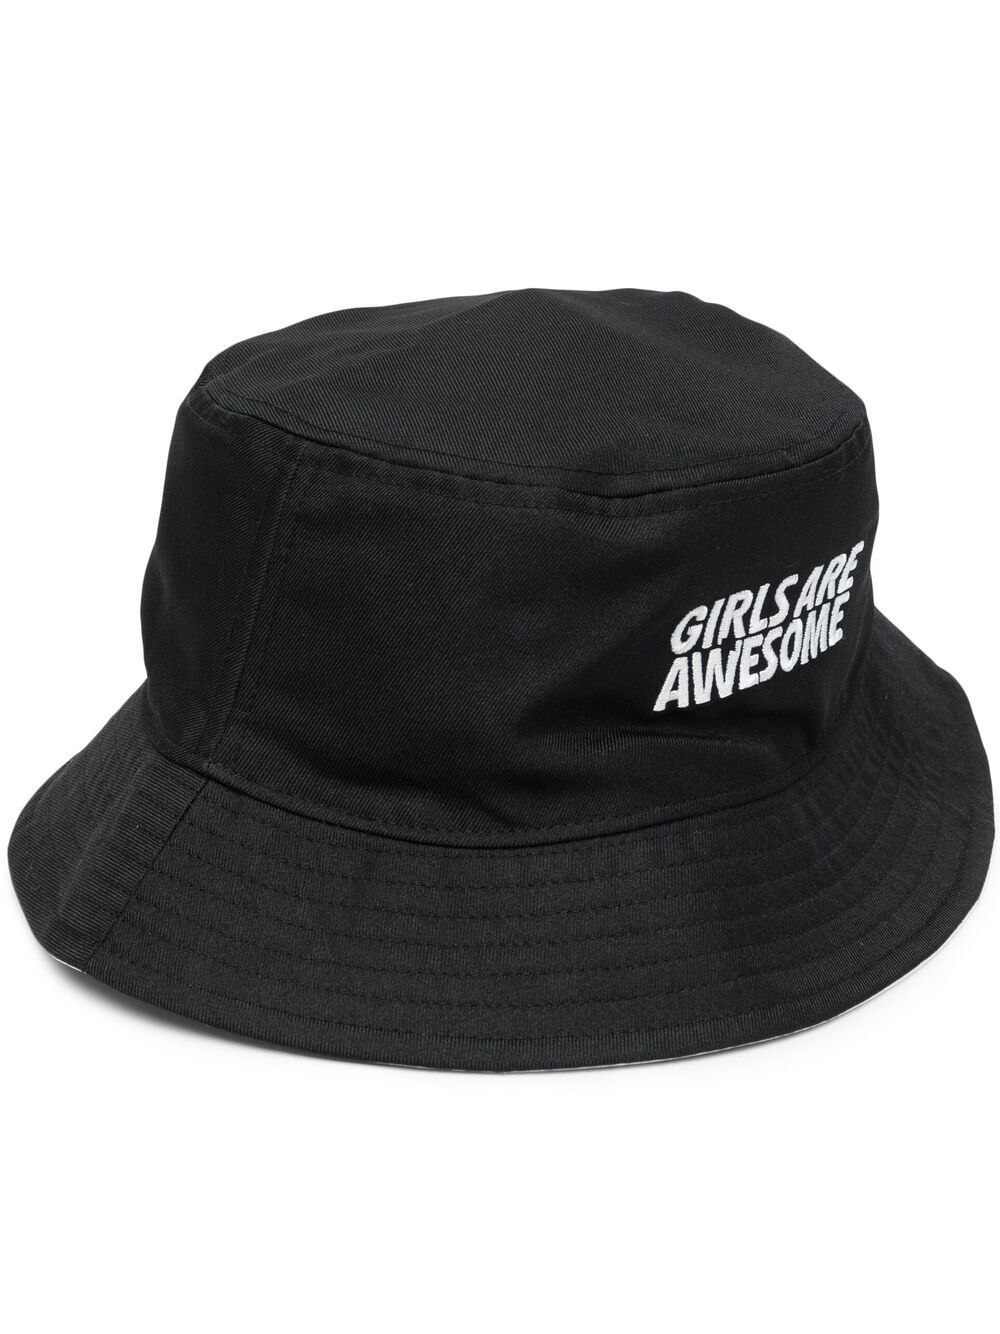 Adidas Originals X Girls Are Awesome Bucket Hat In Black | ModeSens